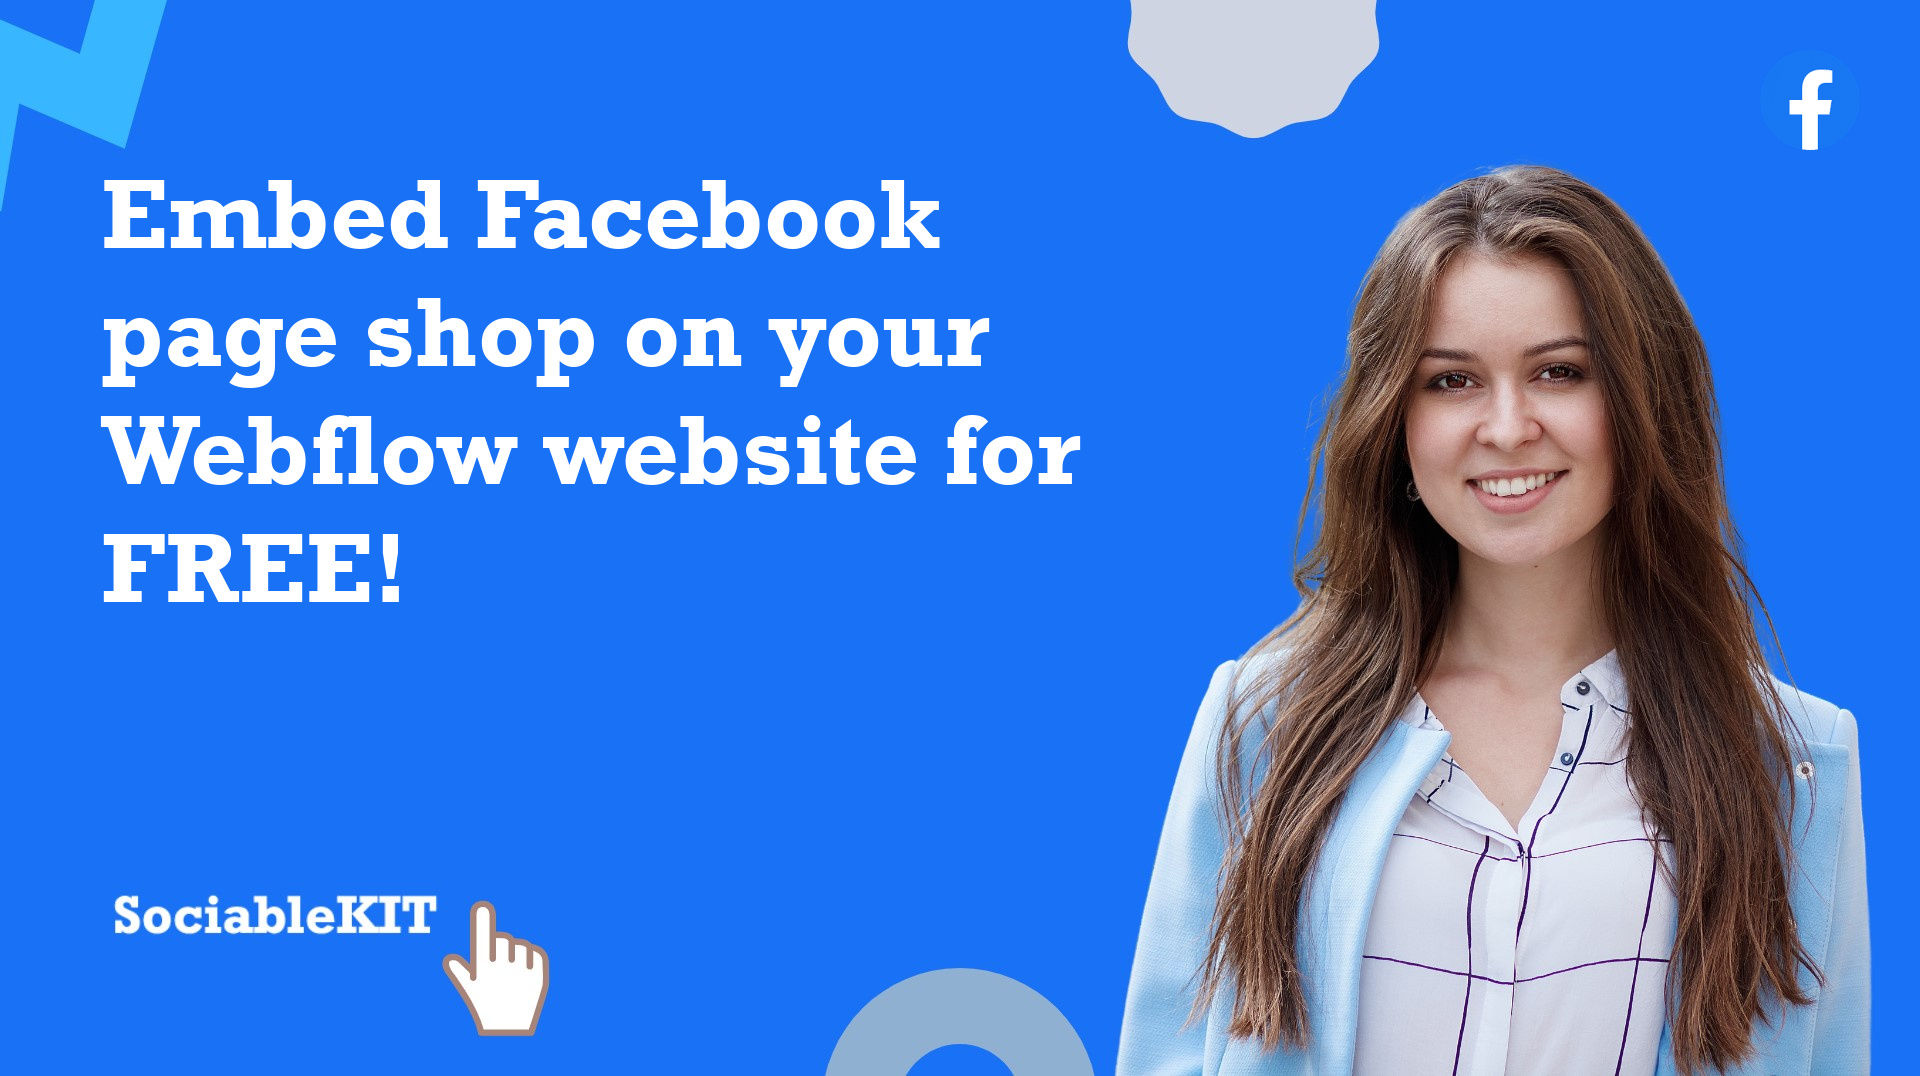 How to embed Facebook page shop on your Webflow website for FREE?